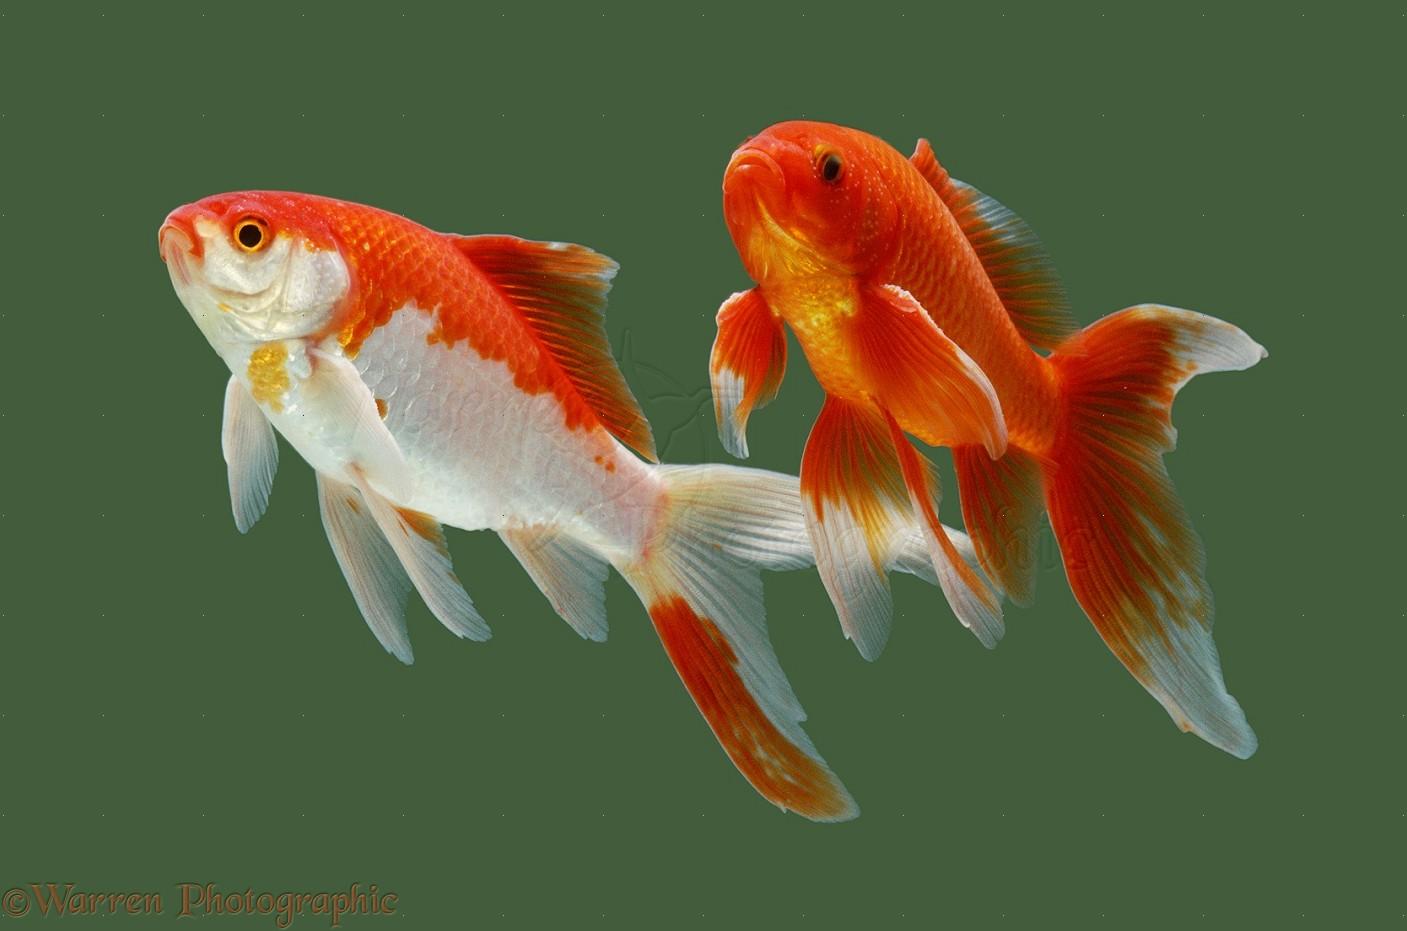 Goldfish Fish Facts & Wallpaper Picture Download